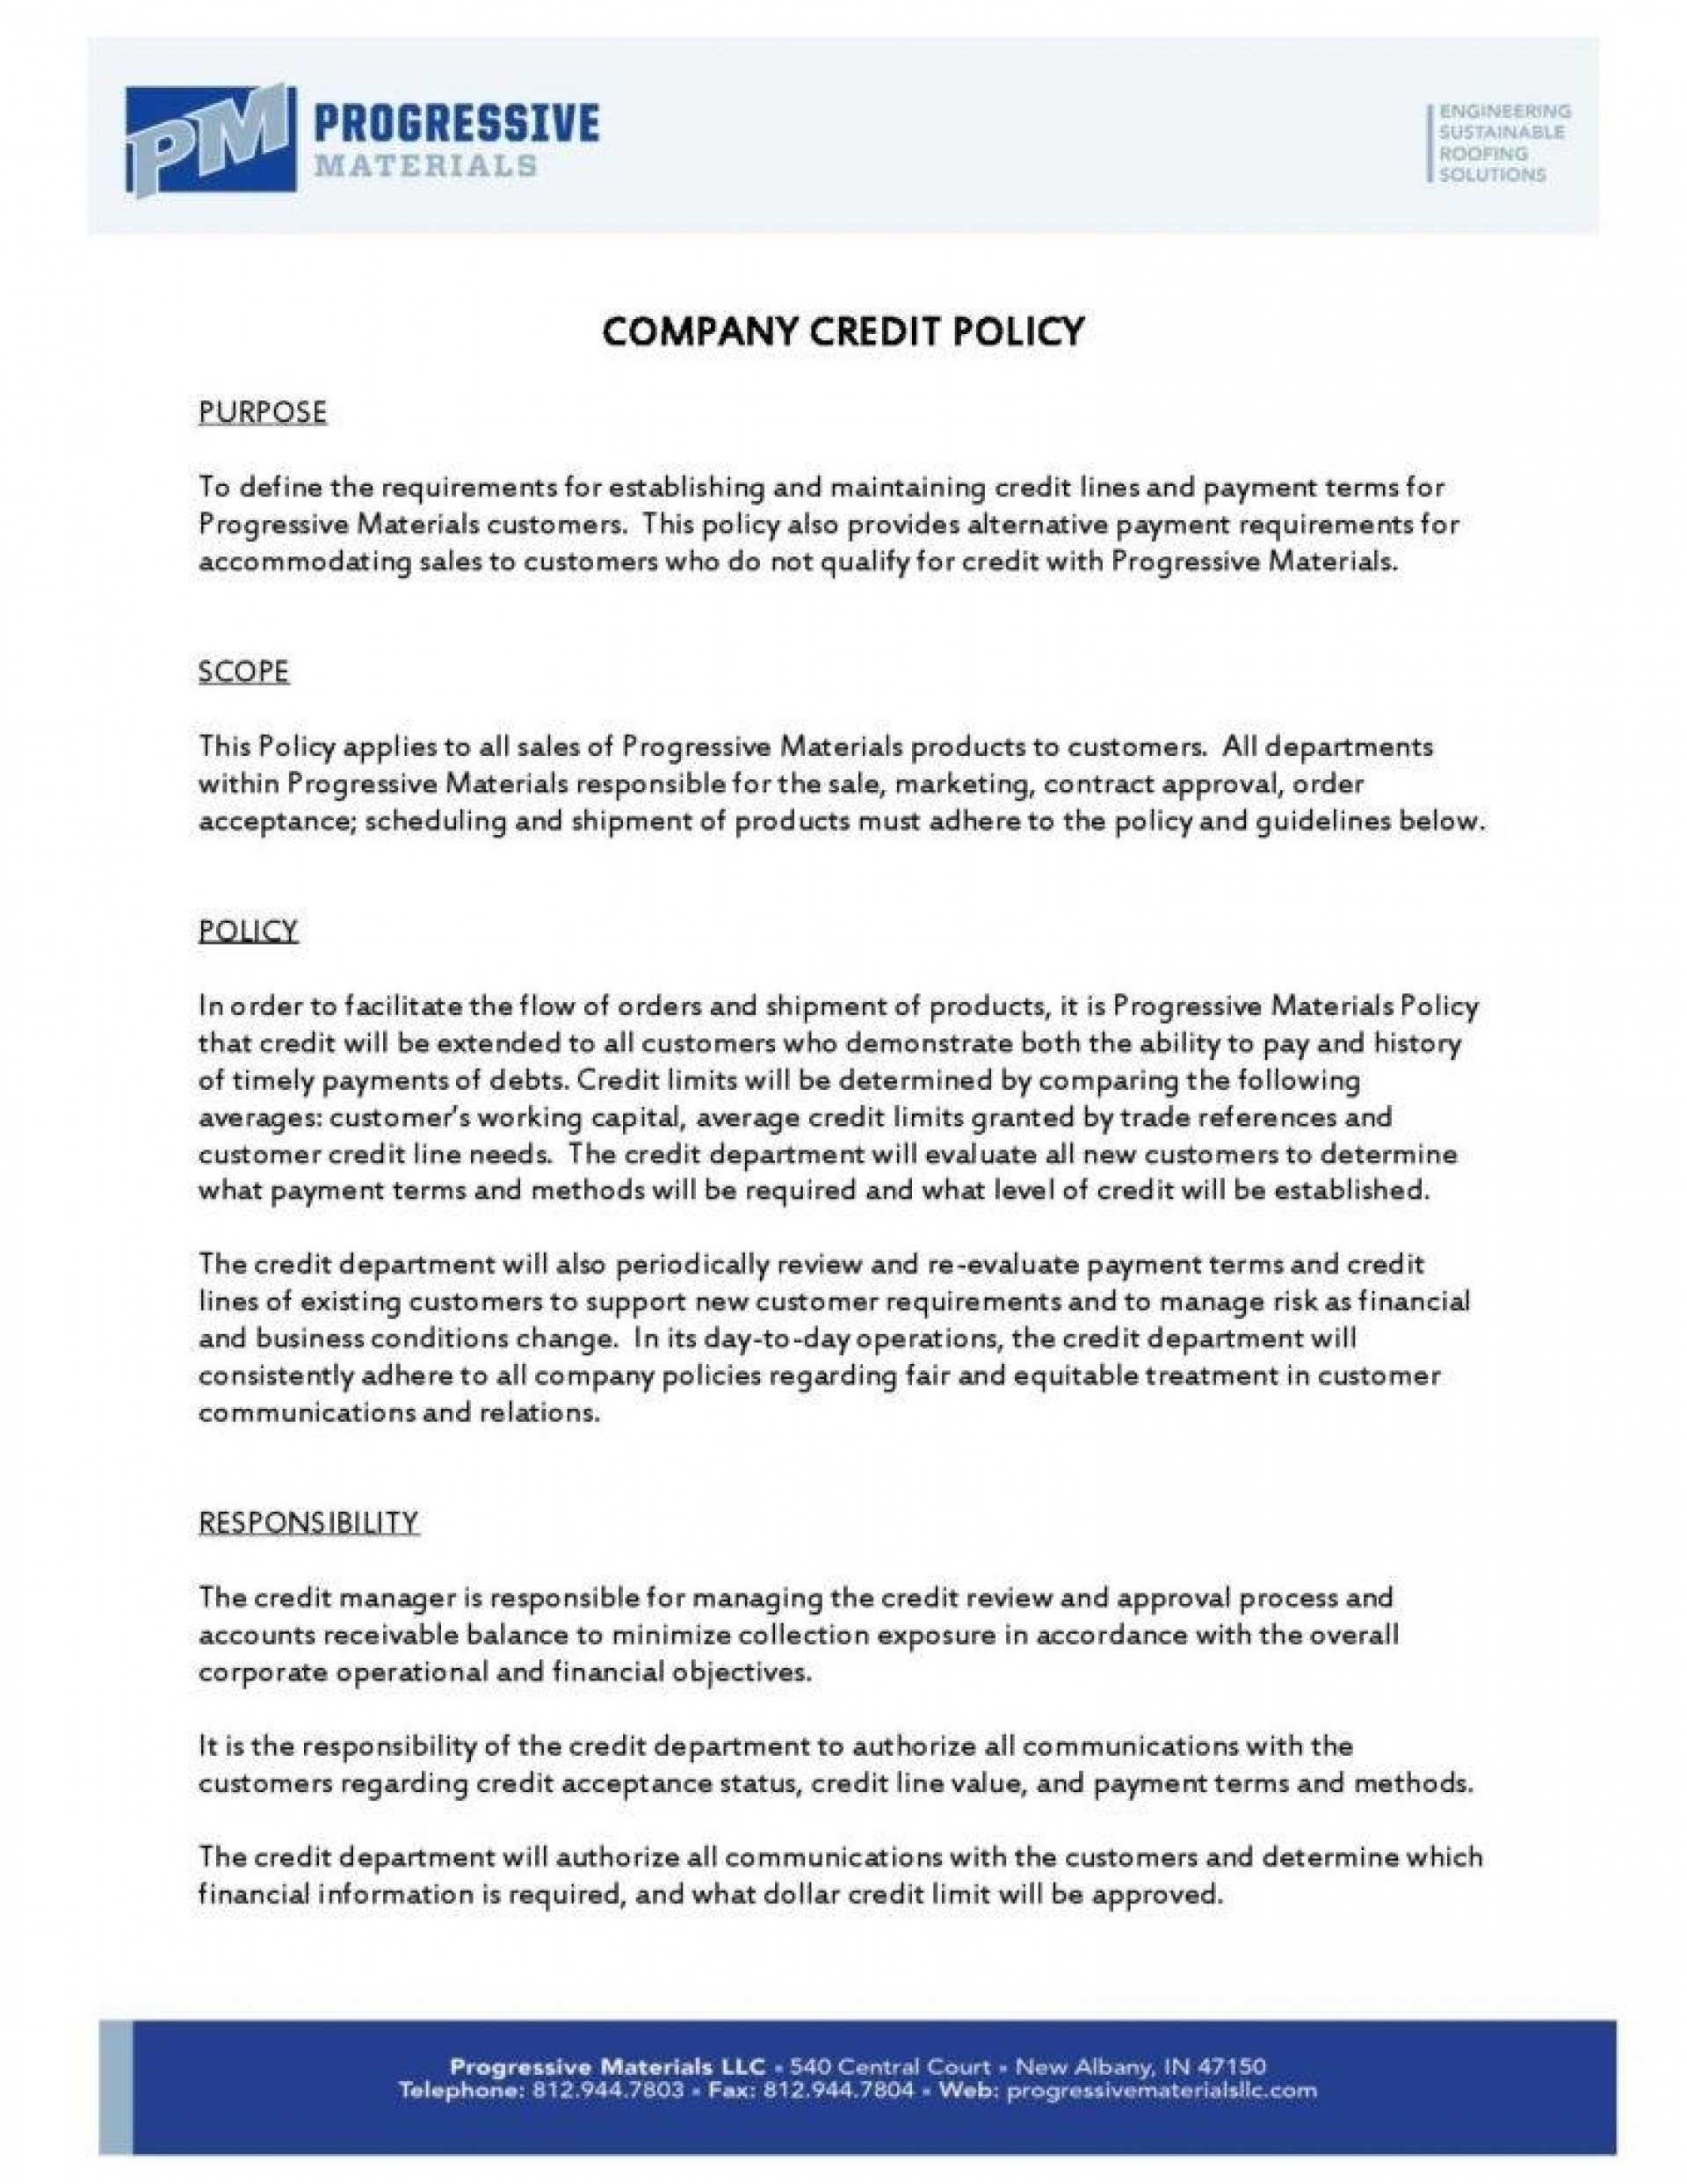 002 Template Ideas Dress Code Policy Company Credit Page Throughout Company Credit Card Policy Template